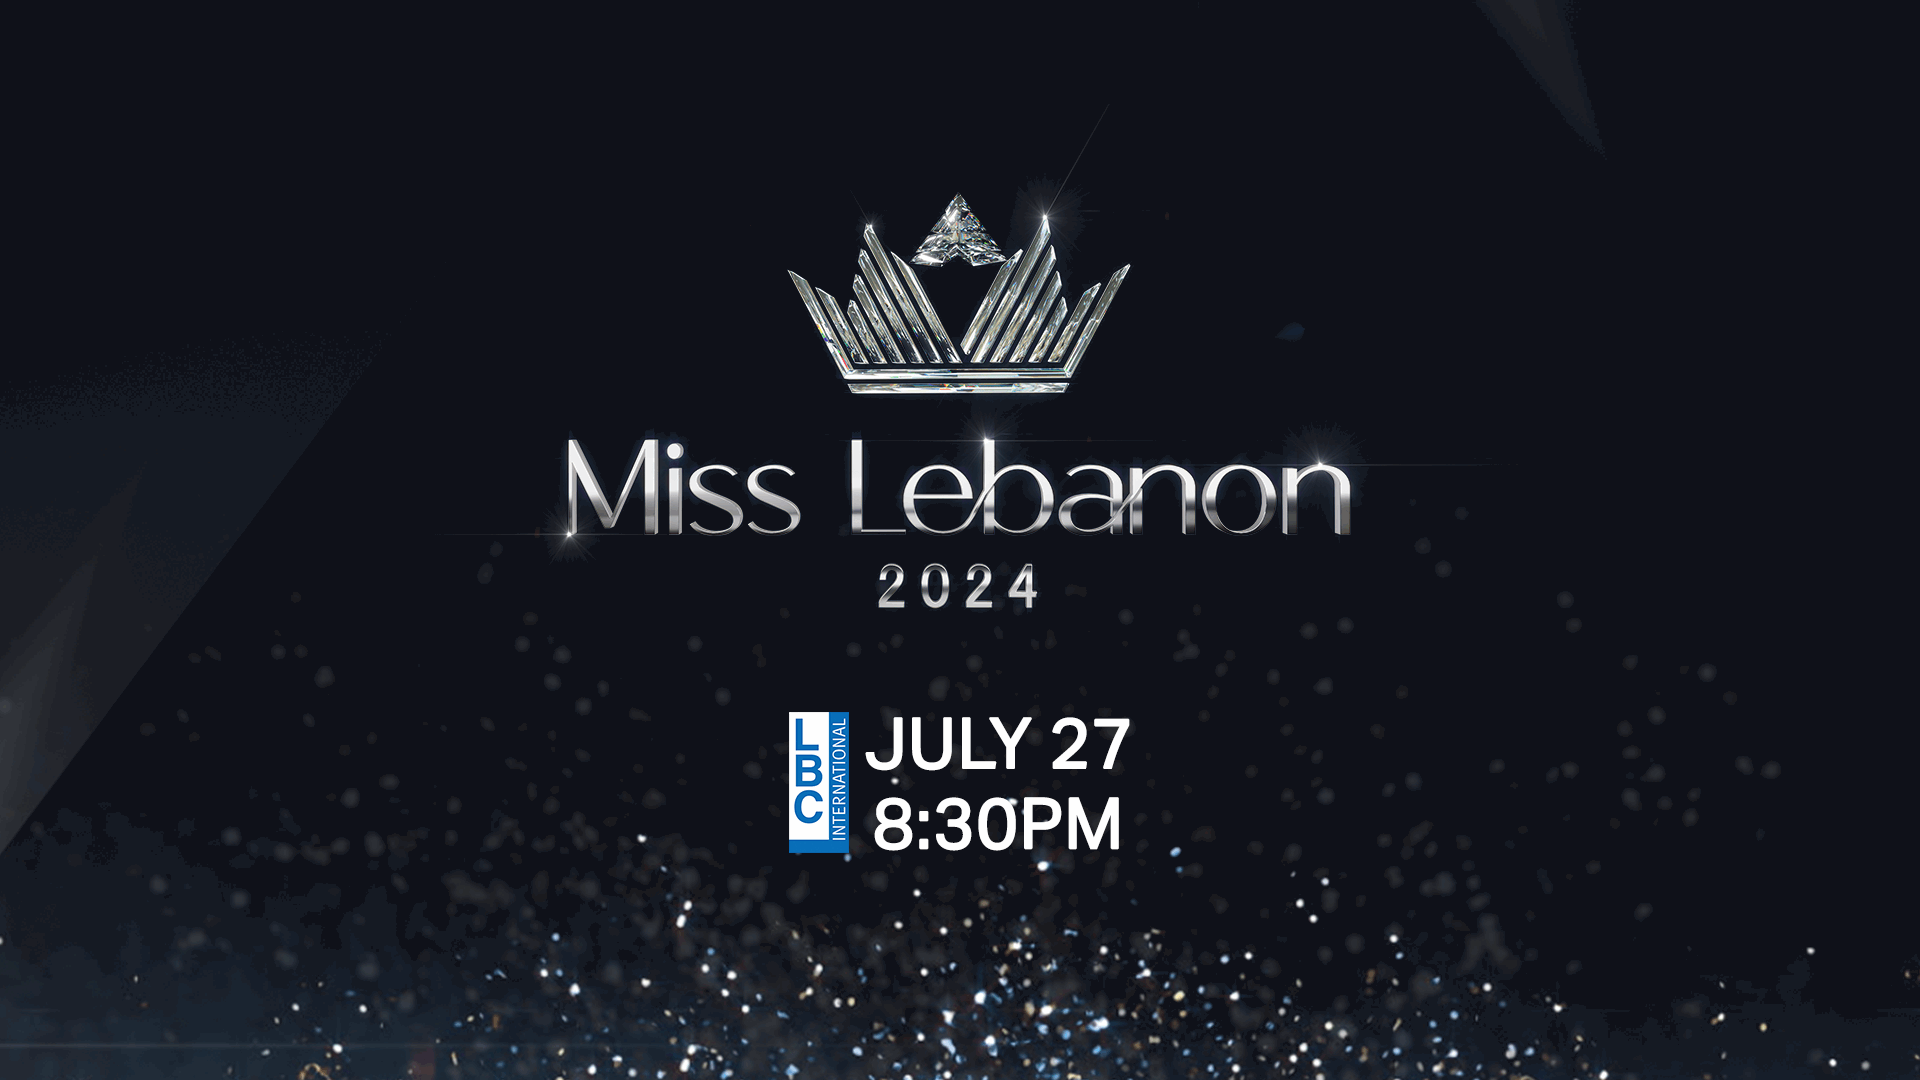 The Countdown Is On! Summer&#39;s Most Awaited Event: Miss Lebanon, Live Tomorrow at 8:30 PM on LBCI and lbcgroup.tv